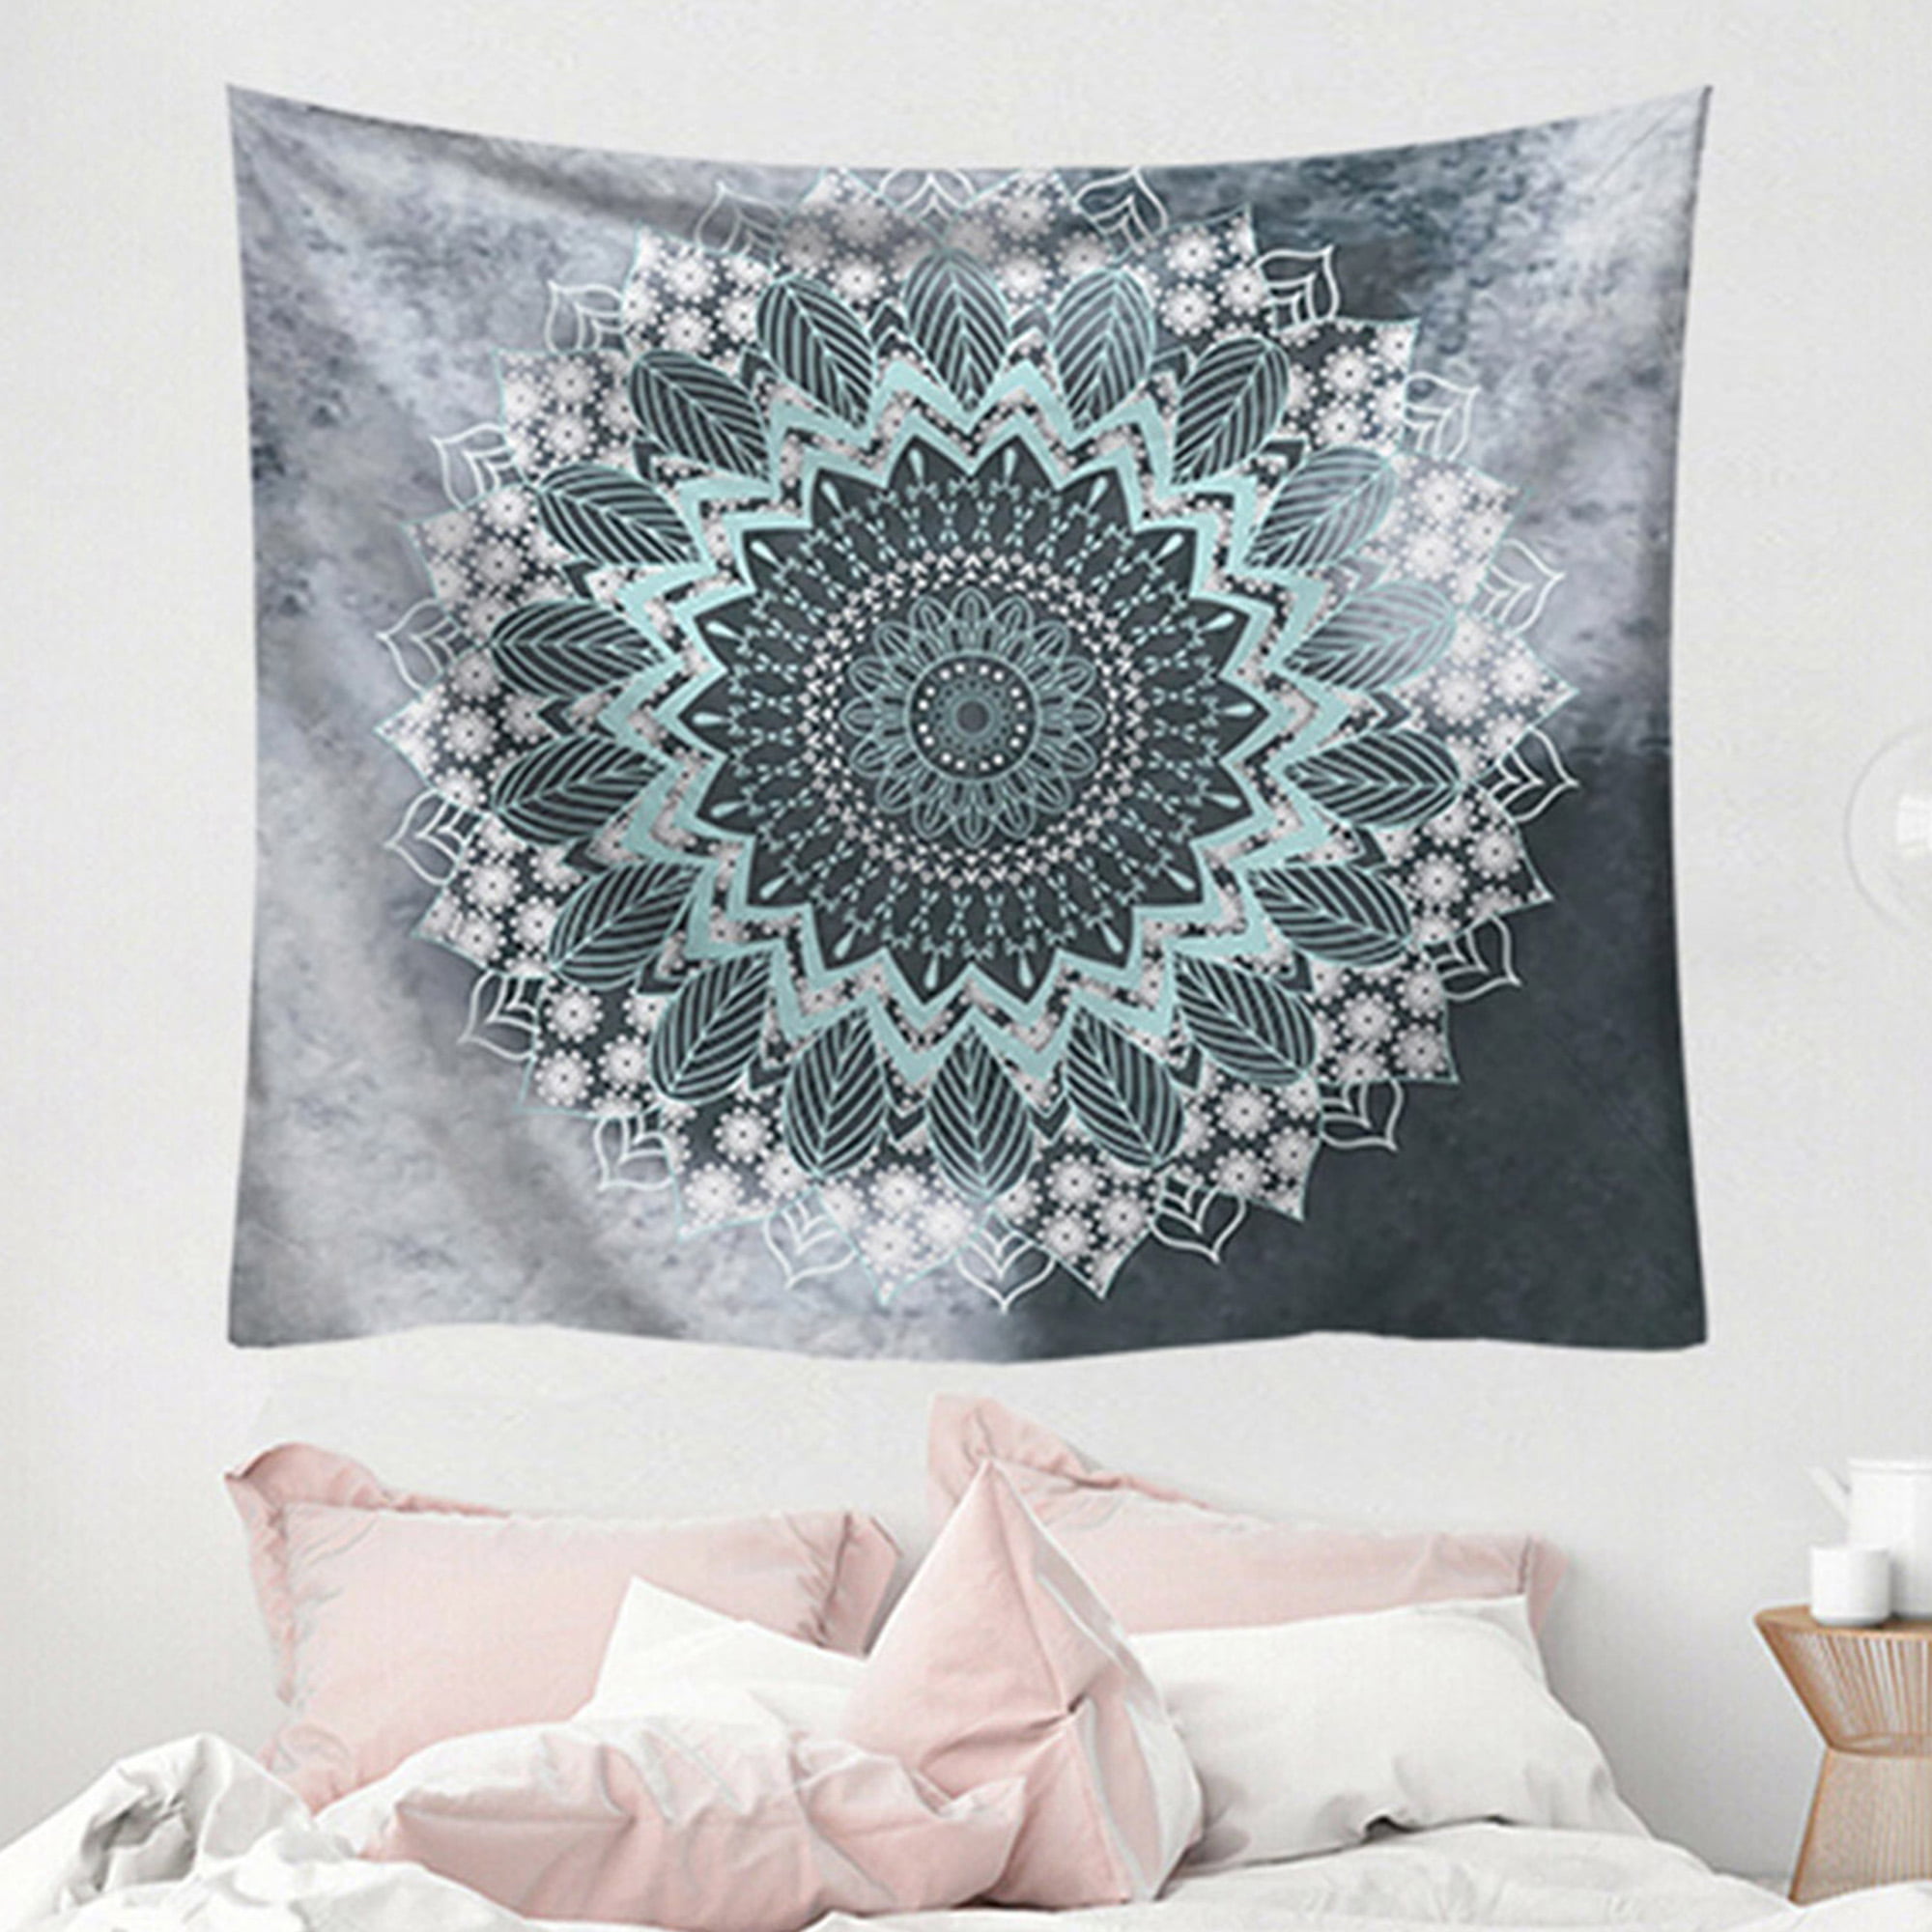 DODOING Tapestry Mandala Hippie Bohemian Tapestries Wall Hanging Flower Psychedelic Tapestry Wall Hanging Bedspread for Bedroom, Living Room, Dorm, Home Decor, (71'' x 90'')-180 x 230 cm -